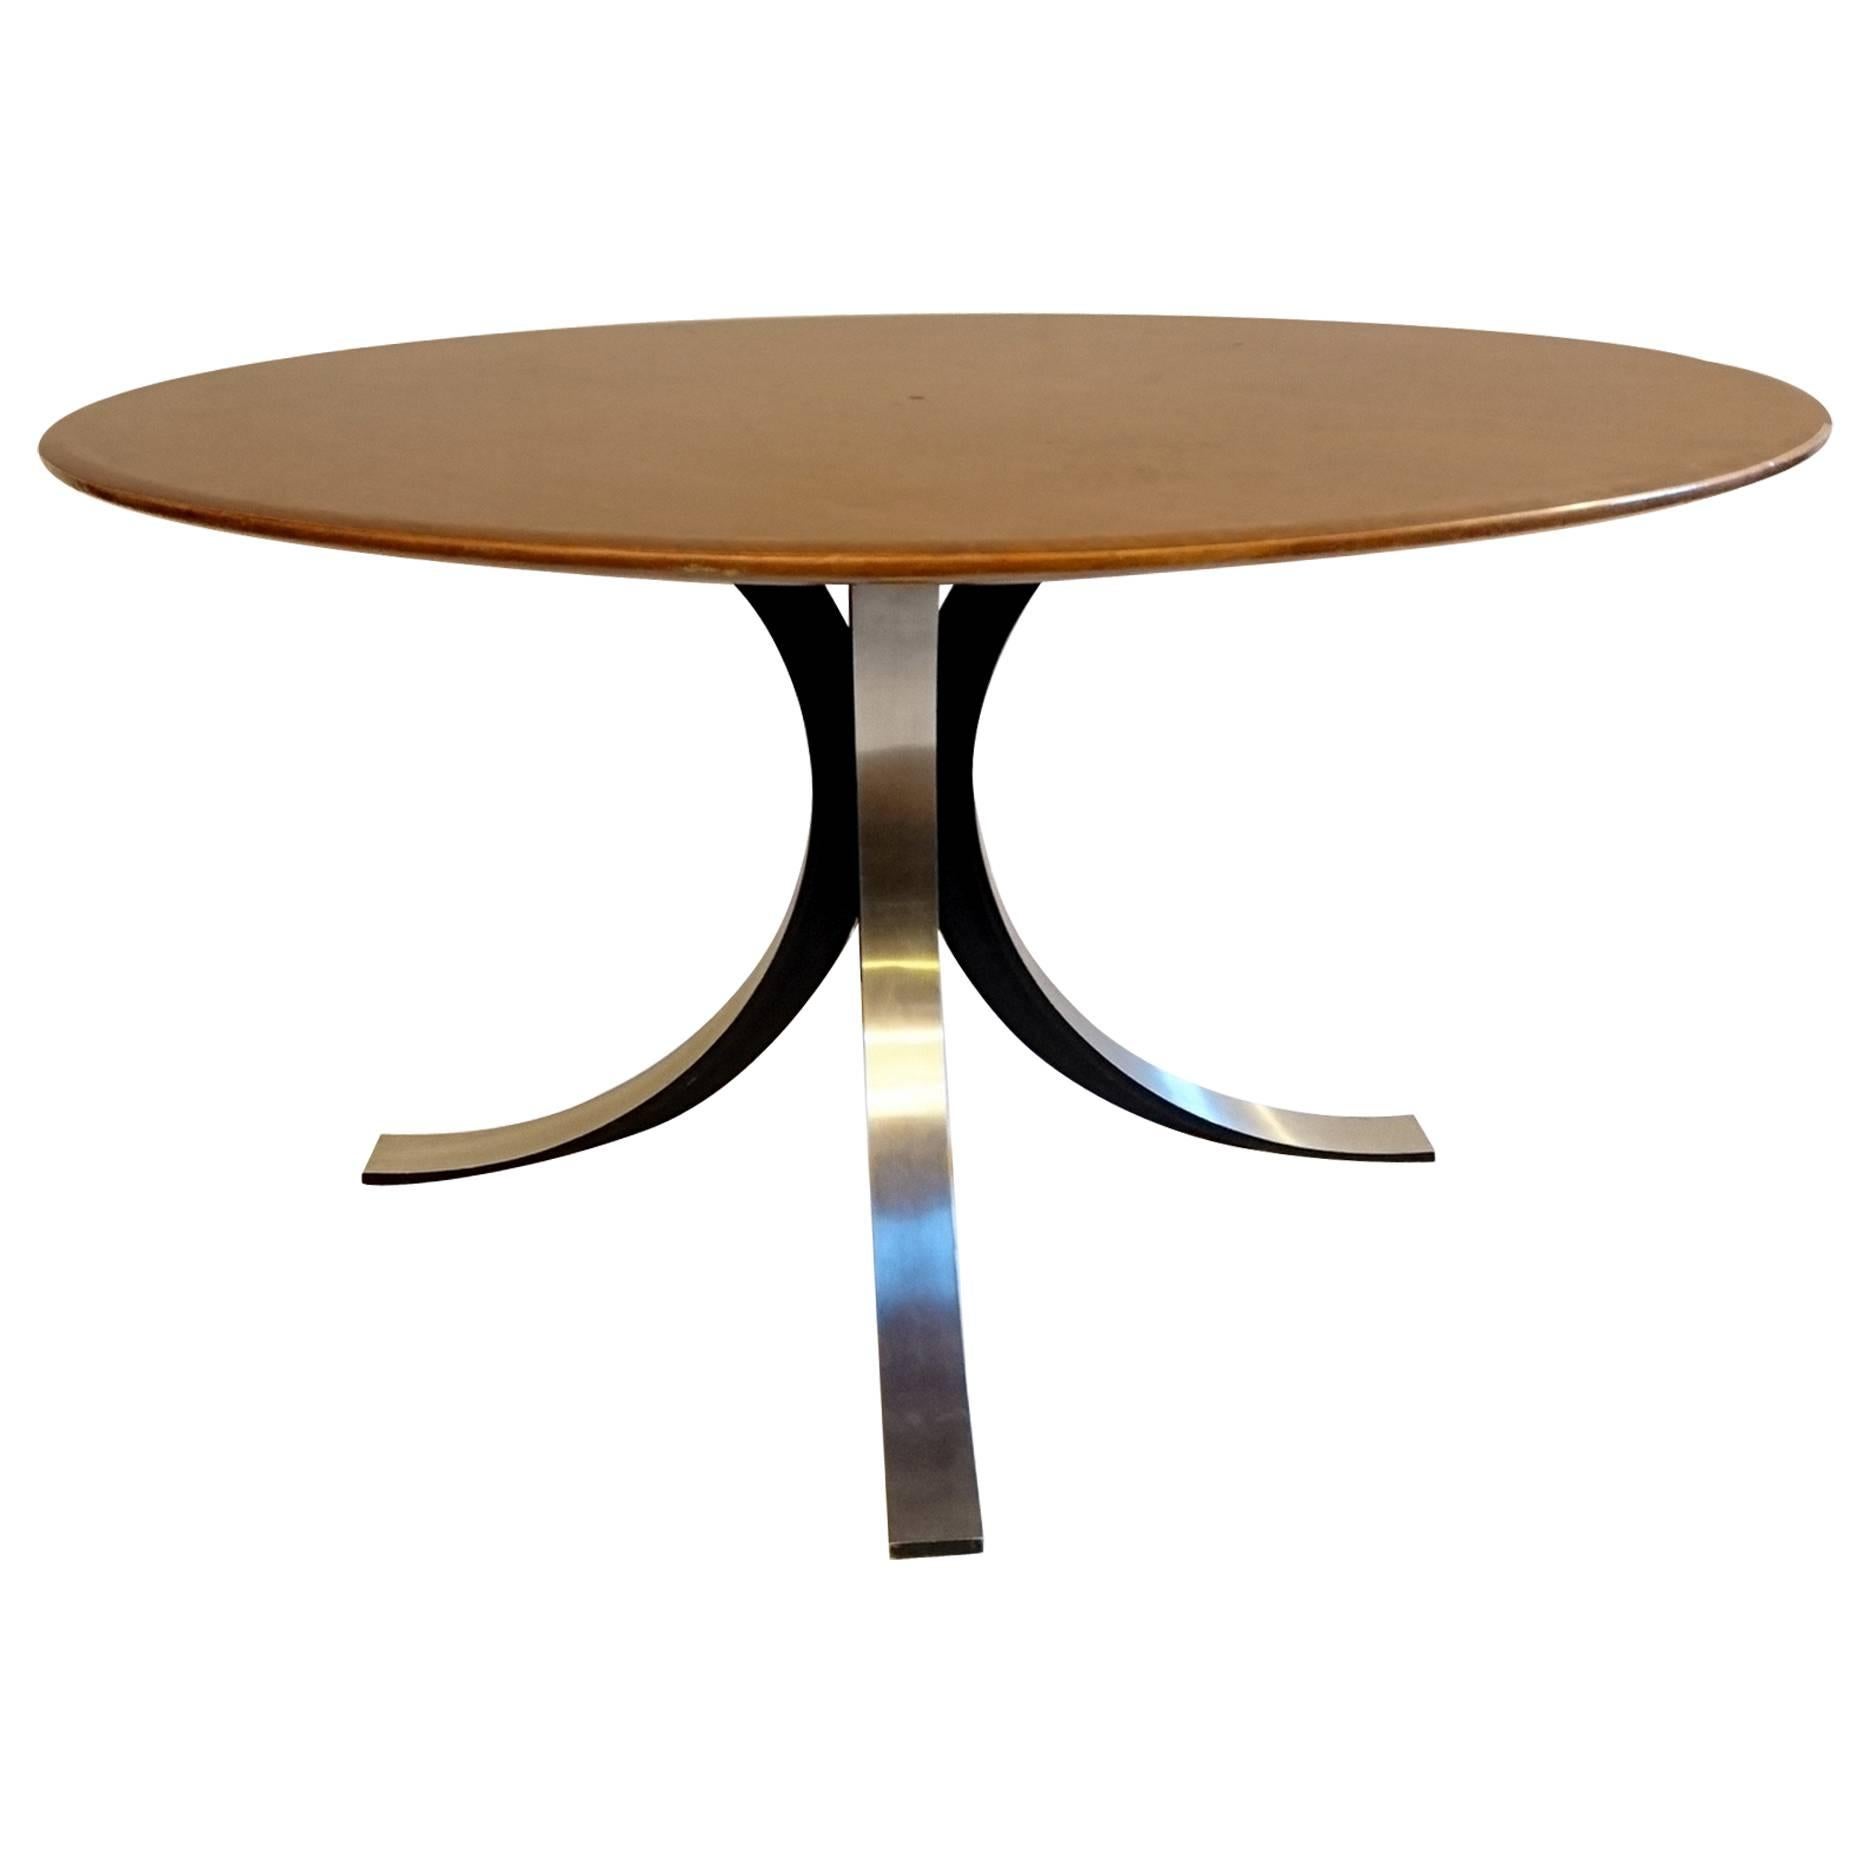 Base in cast steel arches and a round top in varnished maple wood. This T69 model works as a dining or centre table. Height of 65cm.